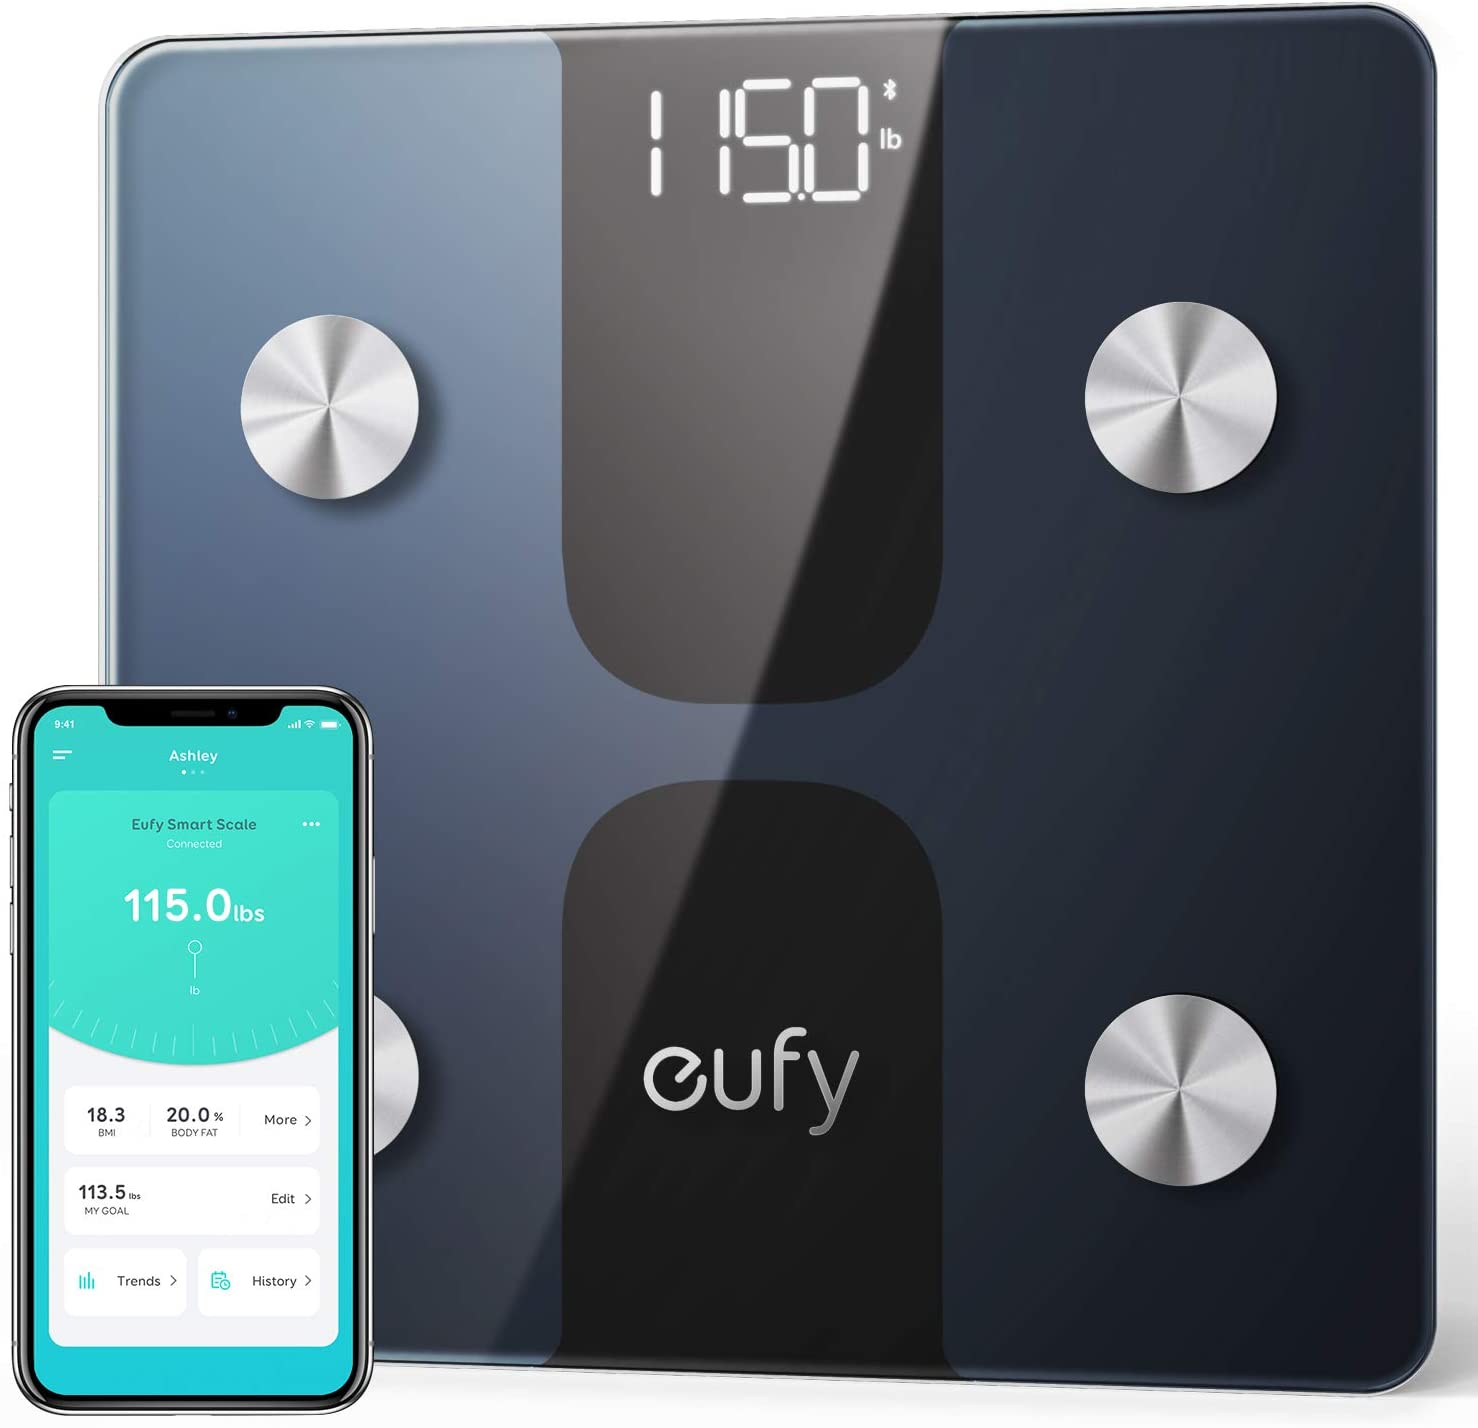 sync fitbit scale with apple health